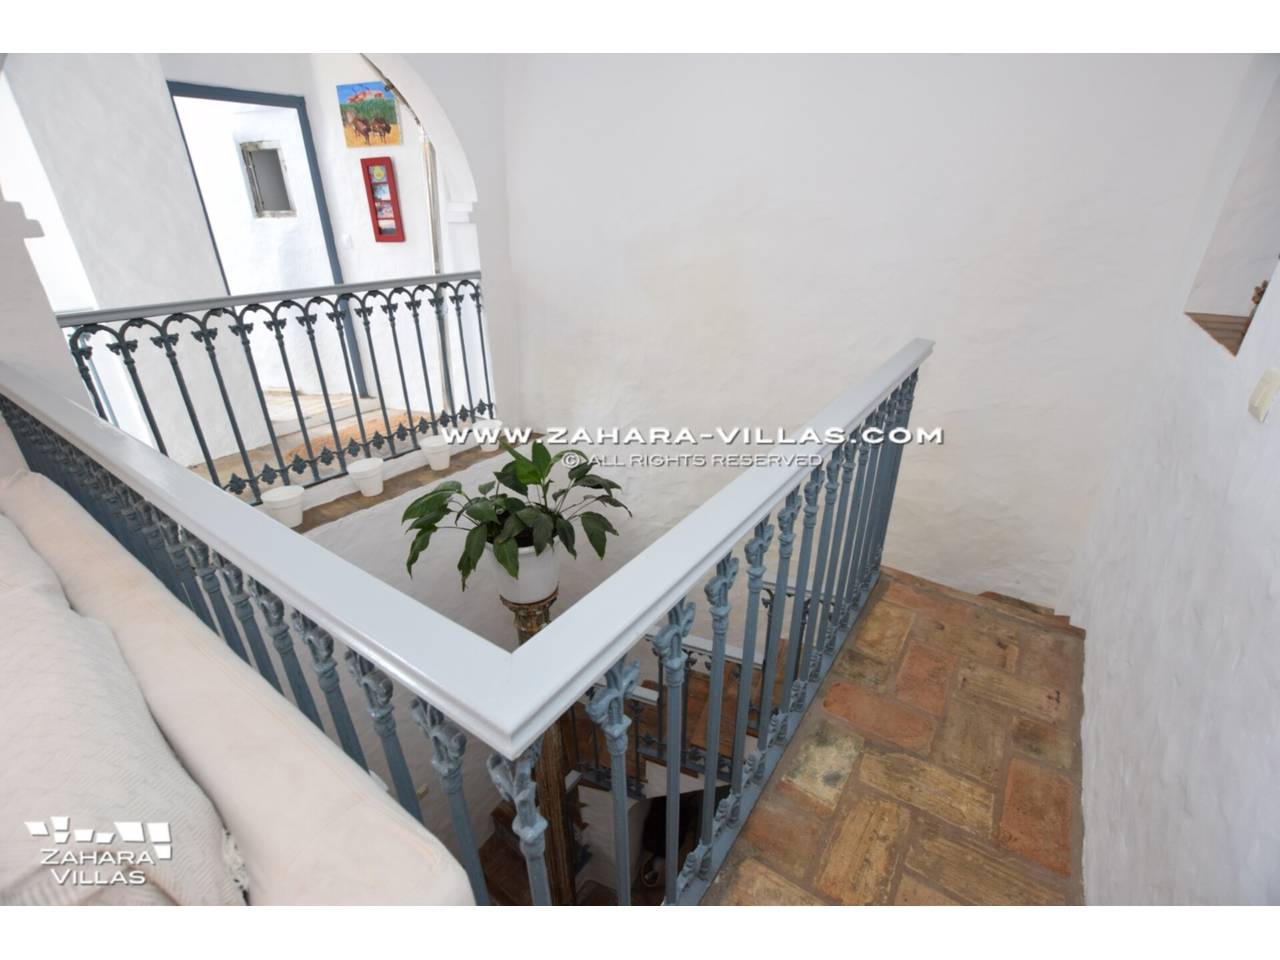 Imagen 39 de Magnificent House with central patio, in the historic center of the town